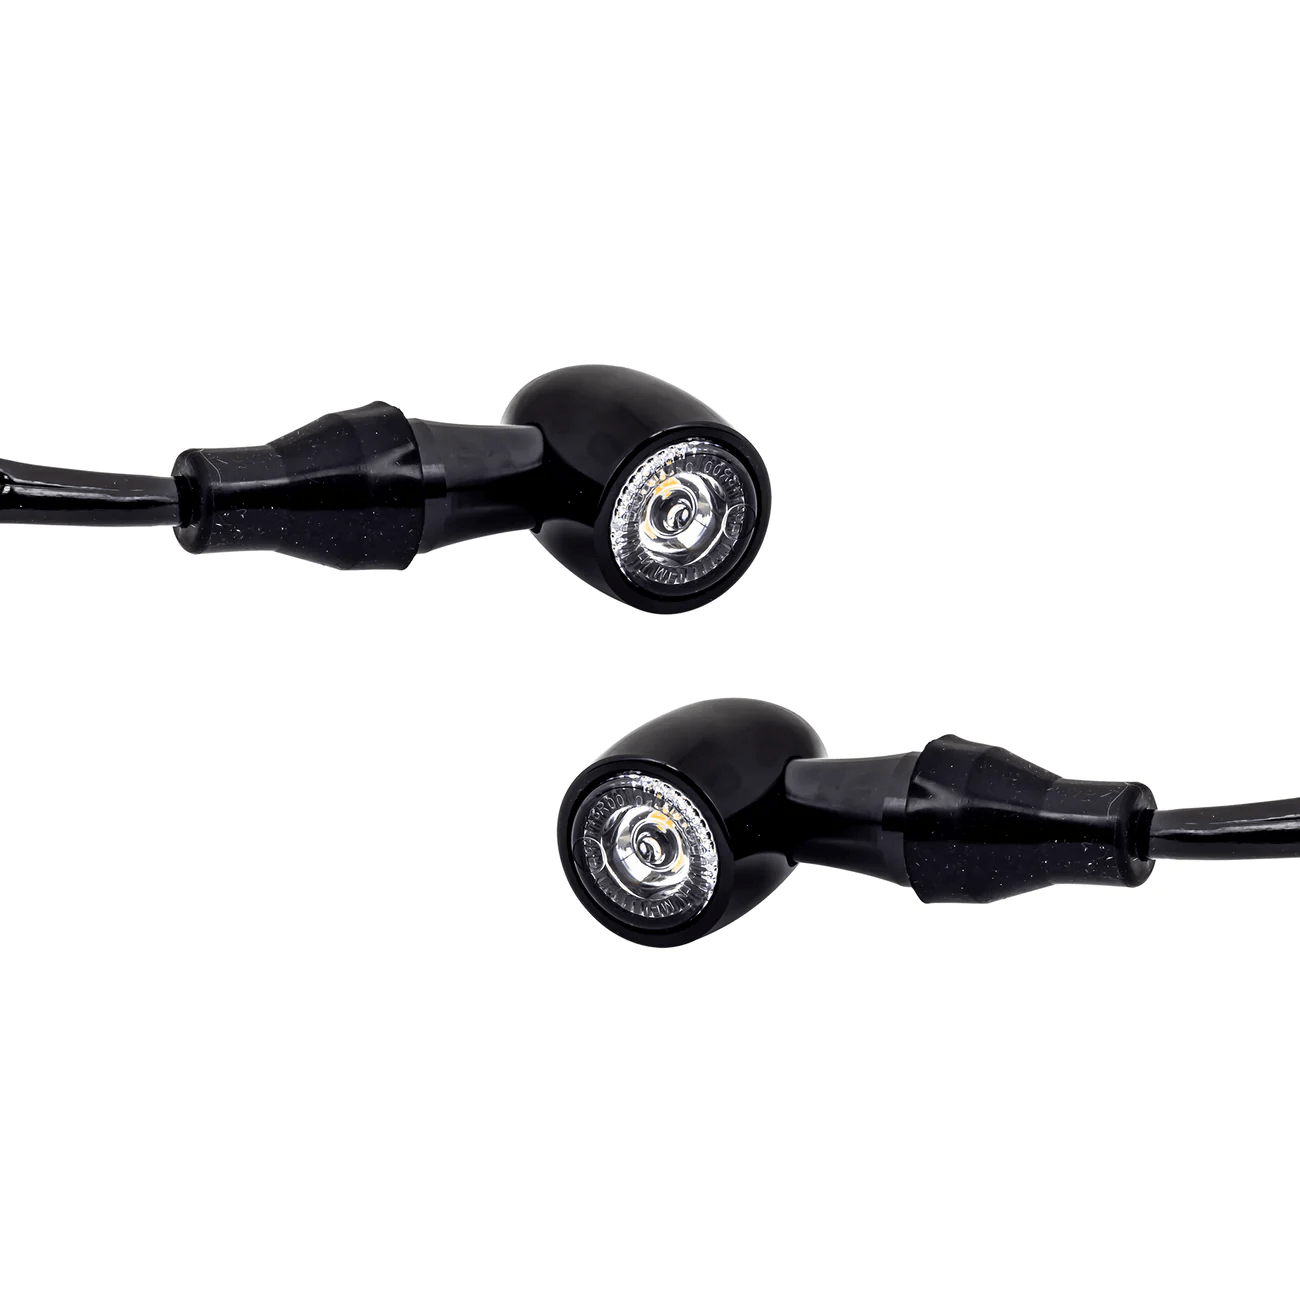 Eagle Lights BULLETBEAM Rear LED Turn Signals with Running Lights and Brake Lights for Indian Scout Bobber, Rogue